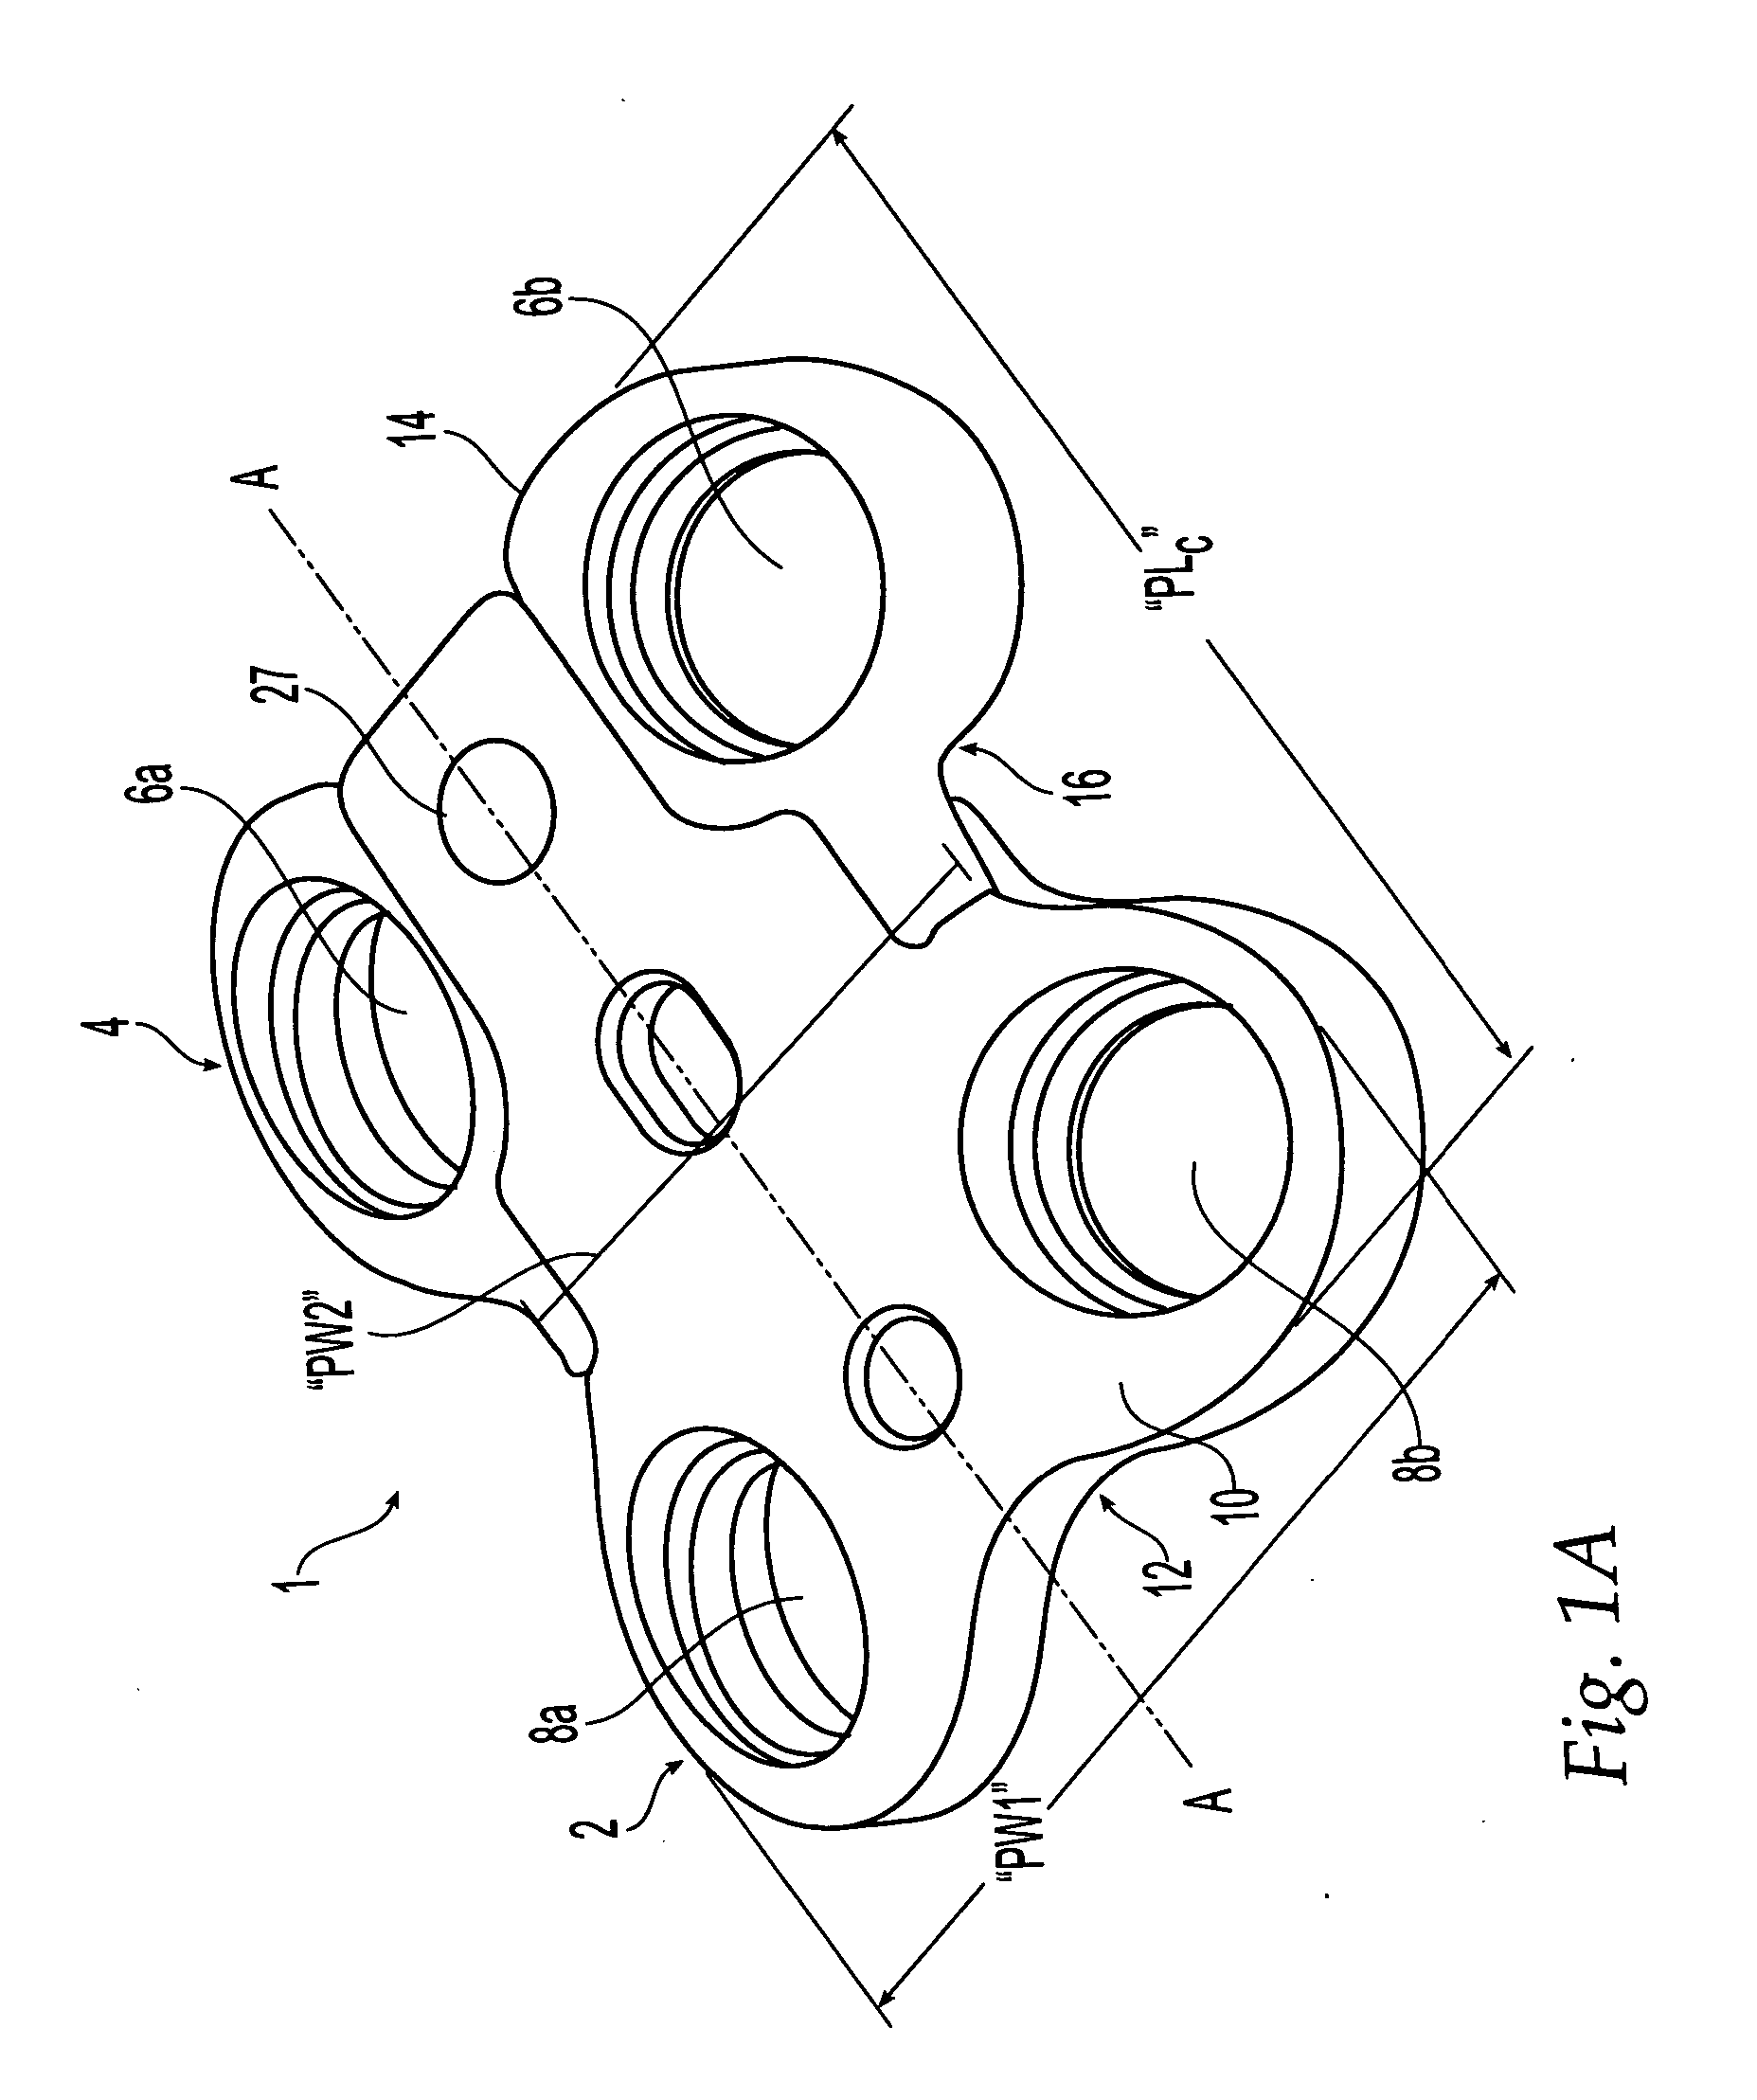 Translatable carriage fixation system